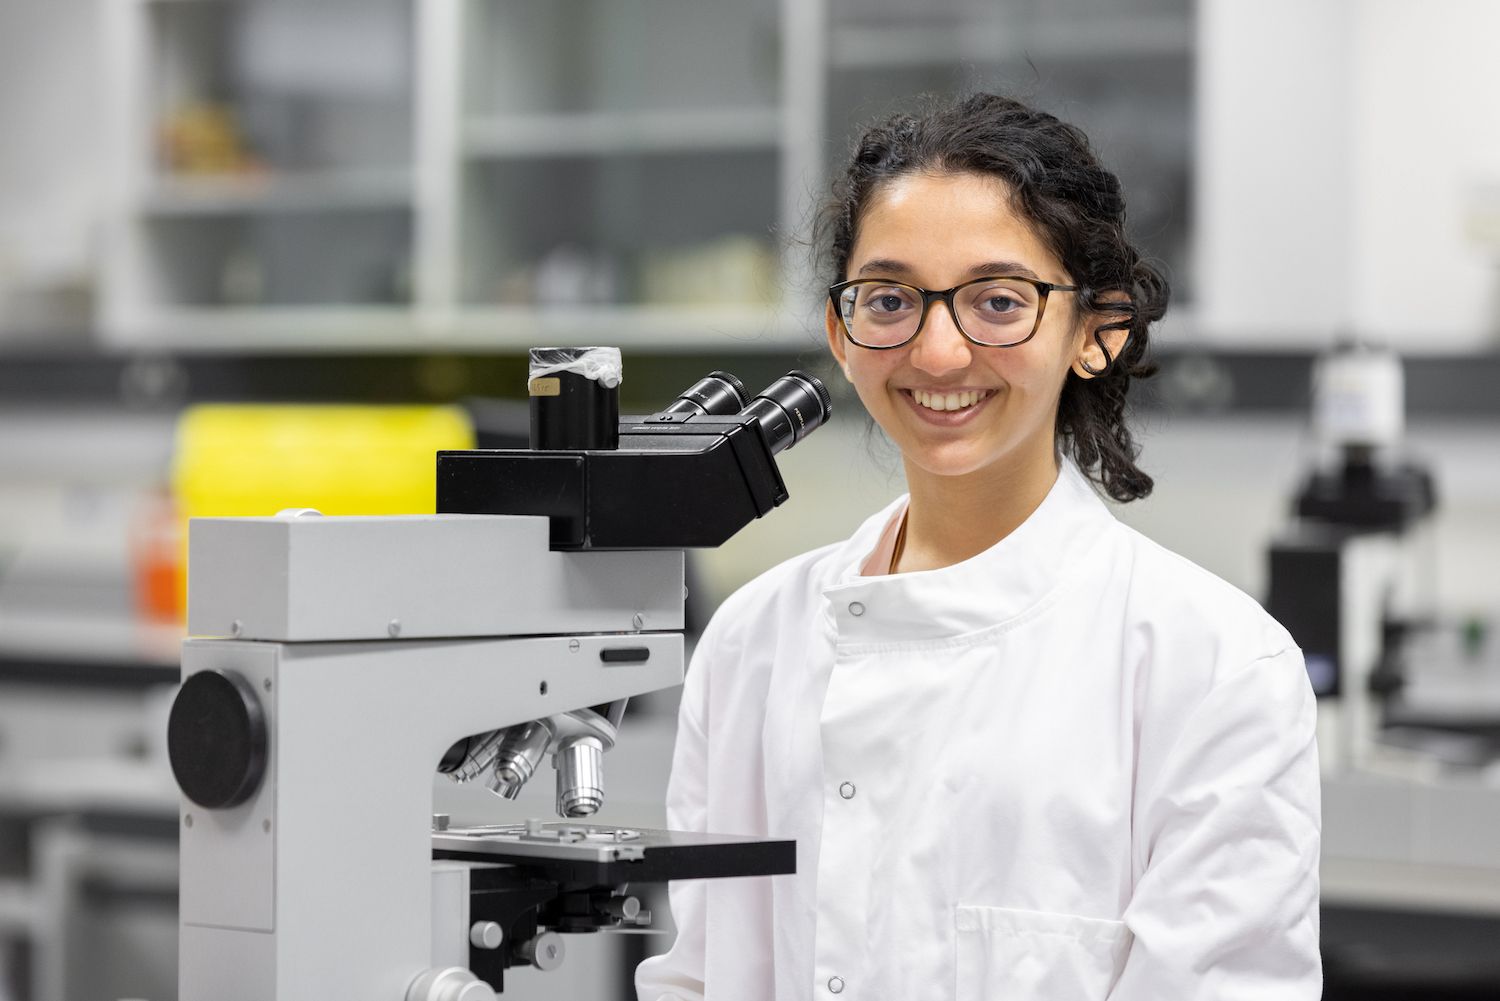 Student standing by microscope smiling